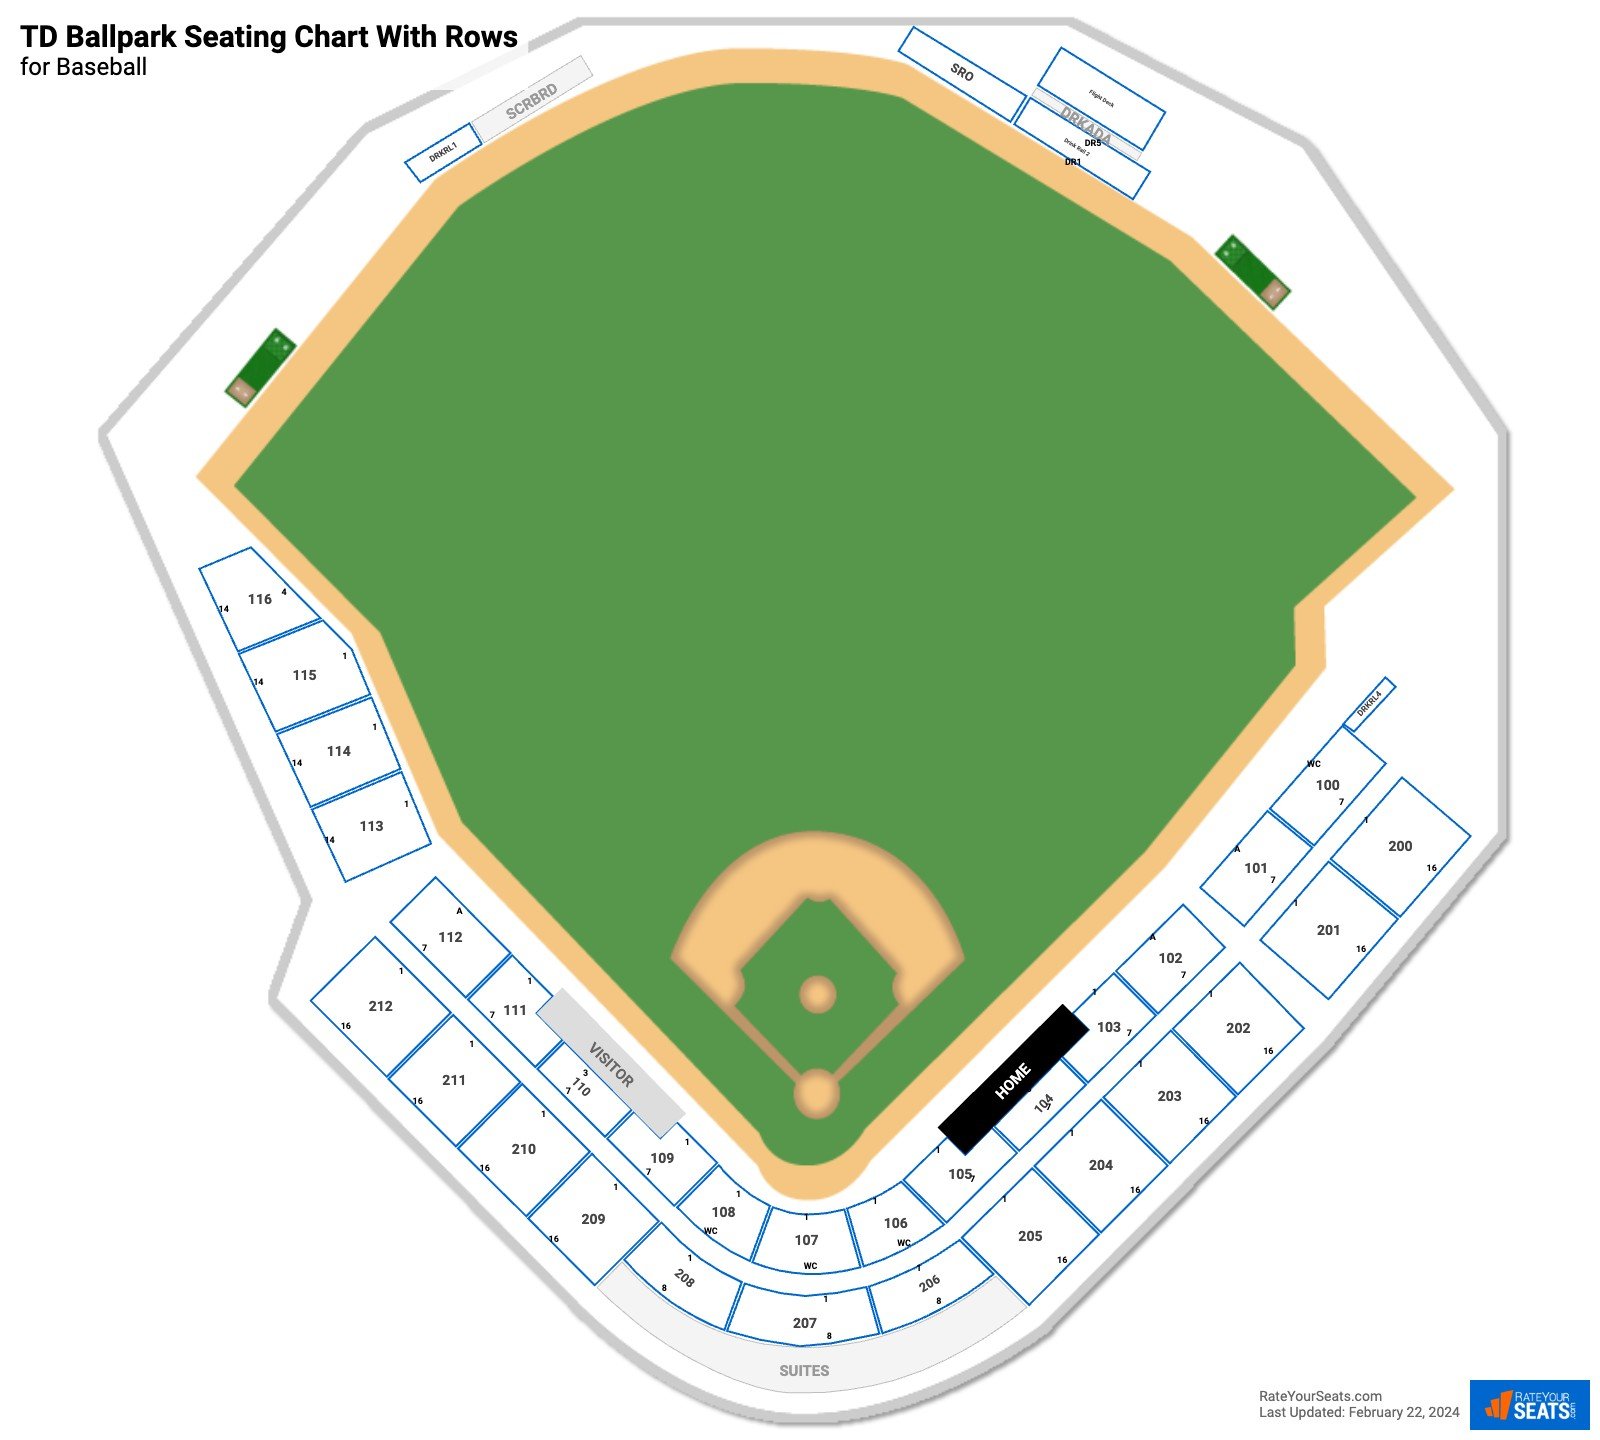 TD Ballpark seating chart with row numbers